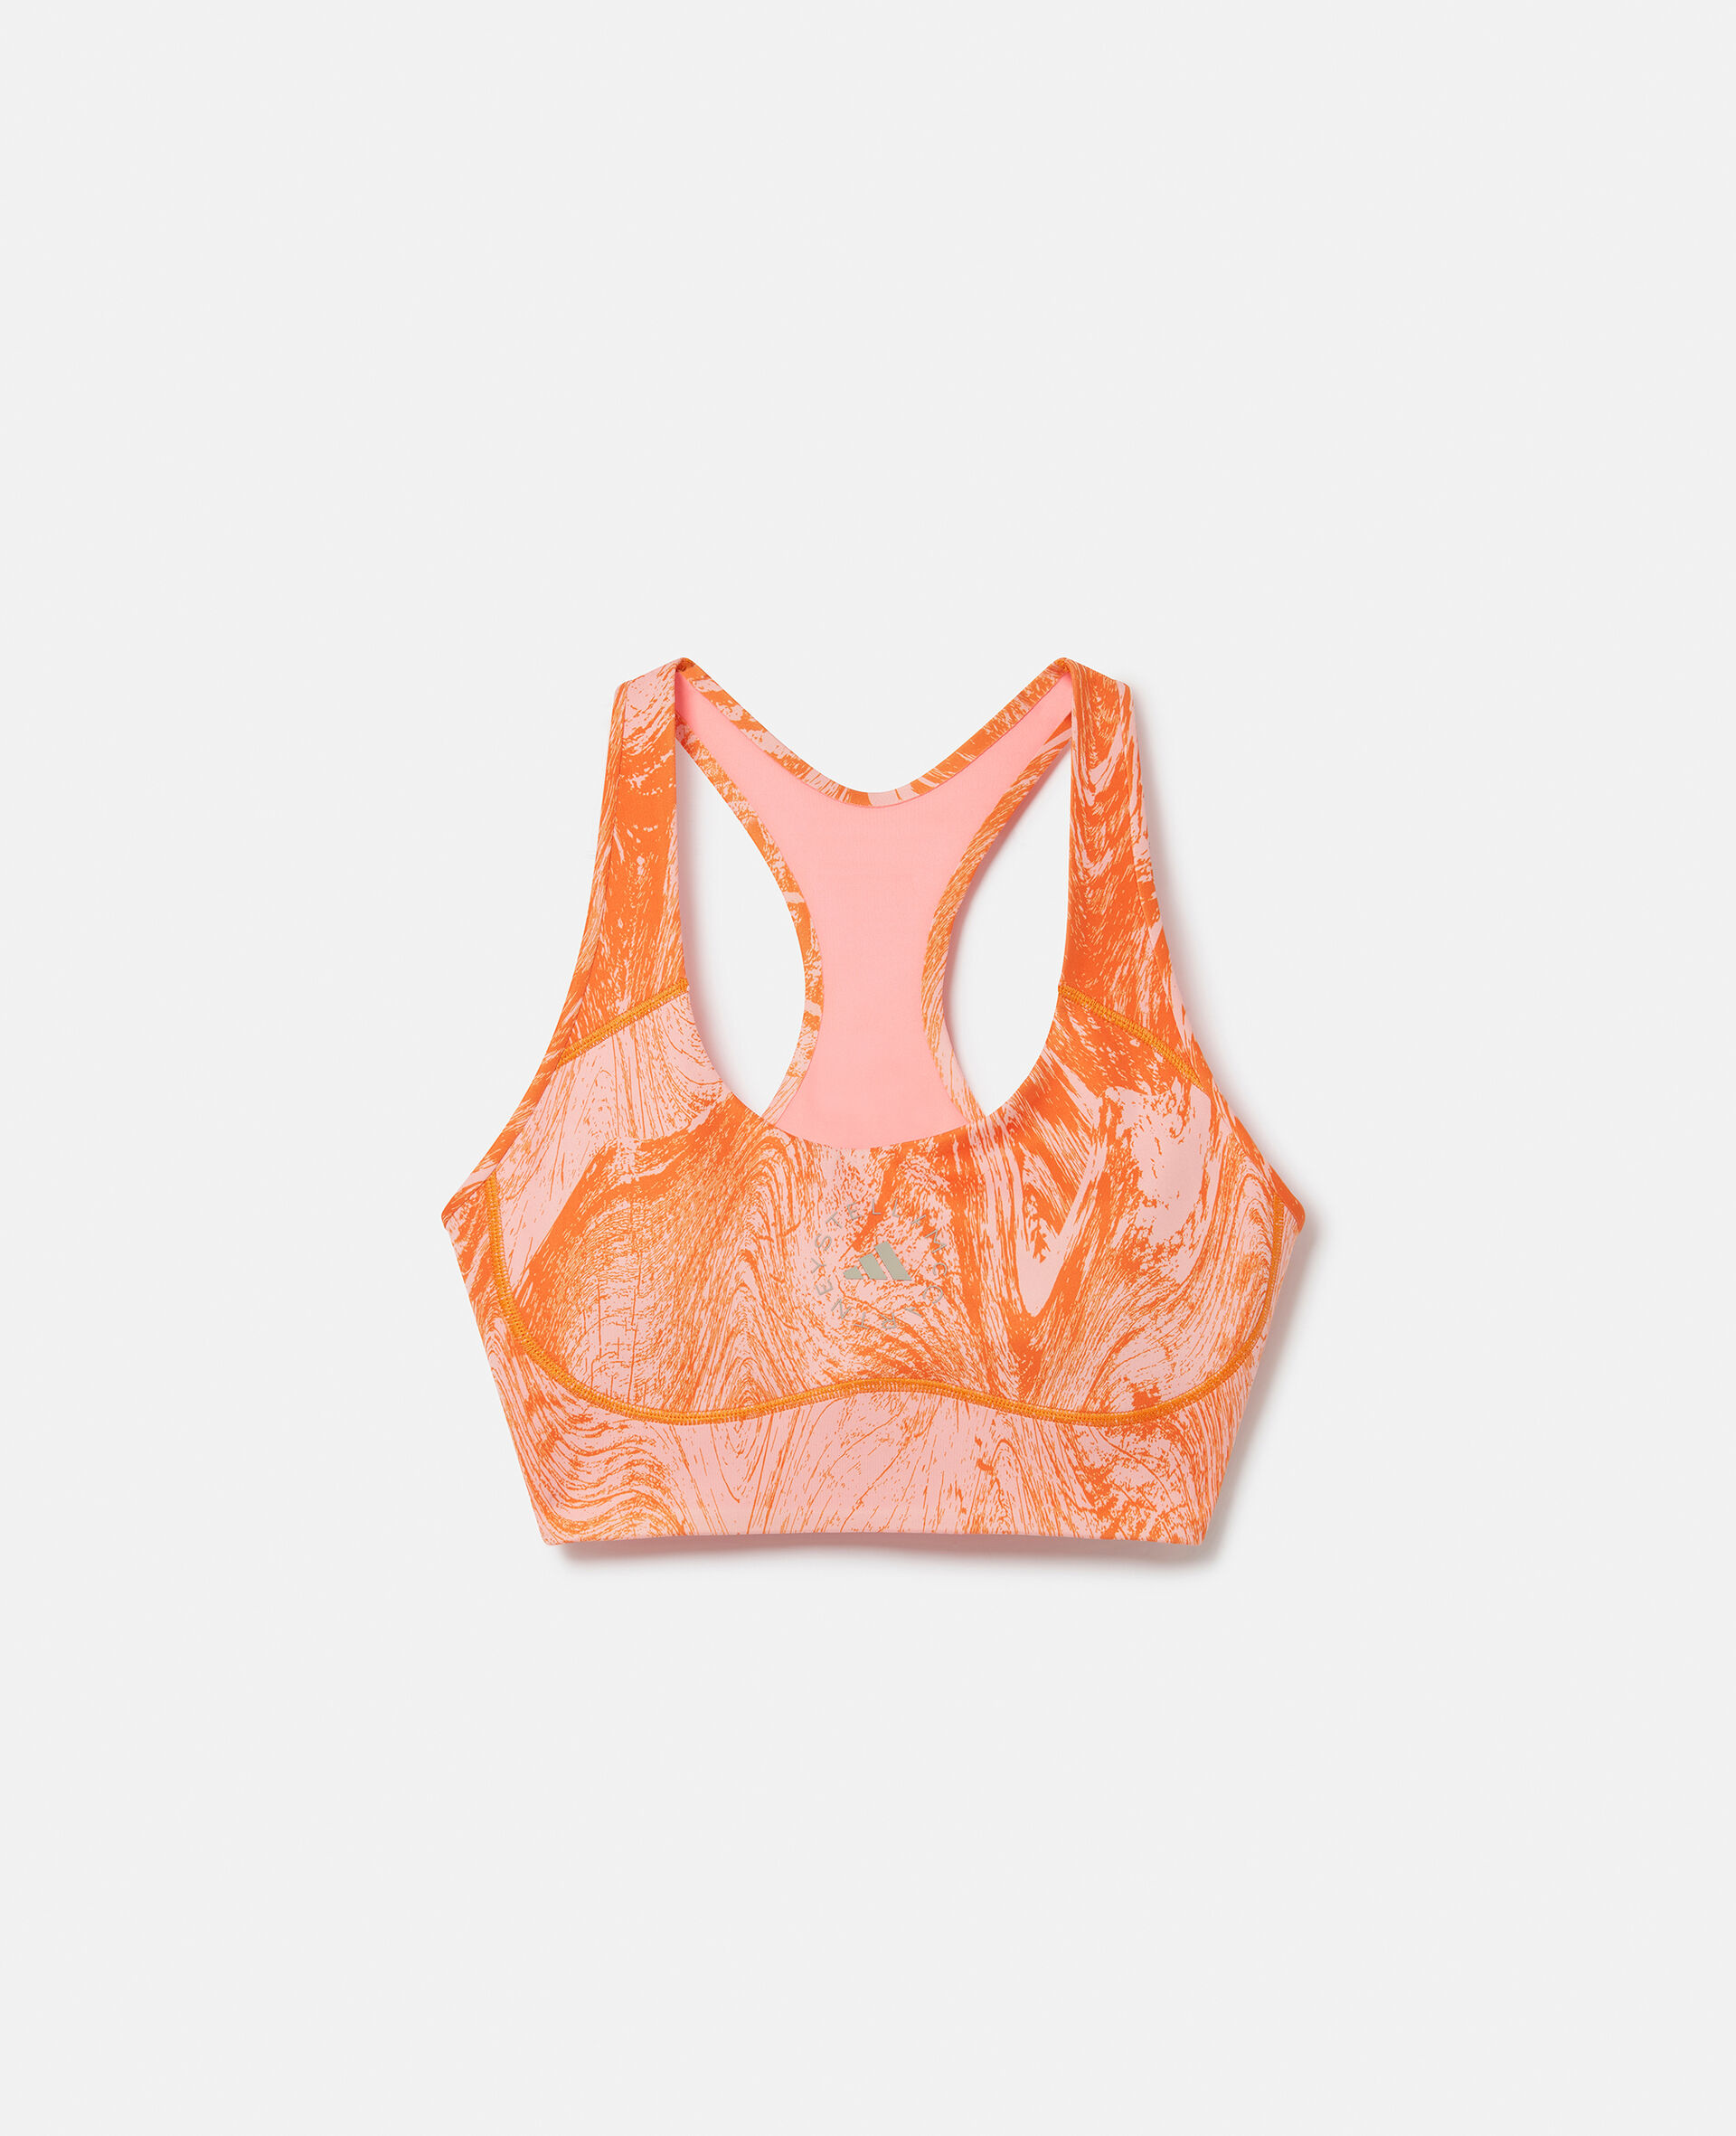 In Honor of Breast Cancer Awareness Month, Adidas Stella McCartney Debuts a  Sports Mastectomy Bra